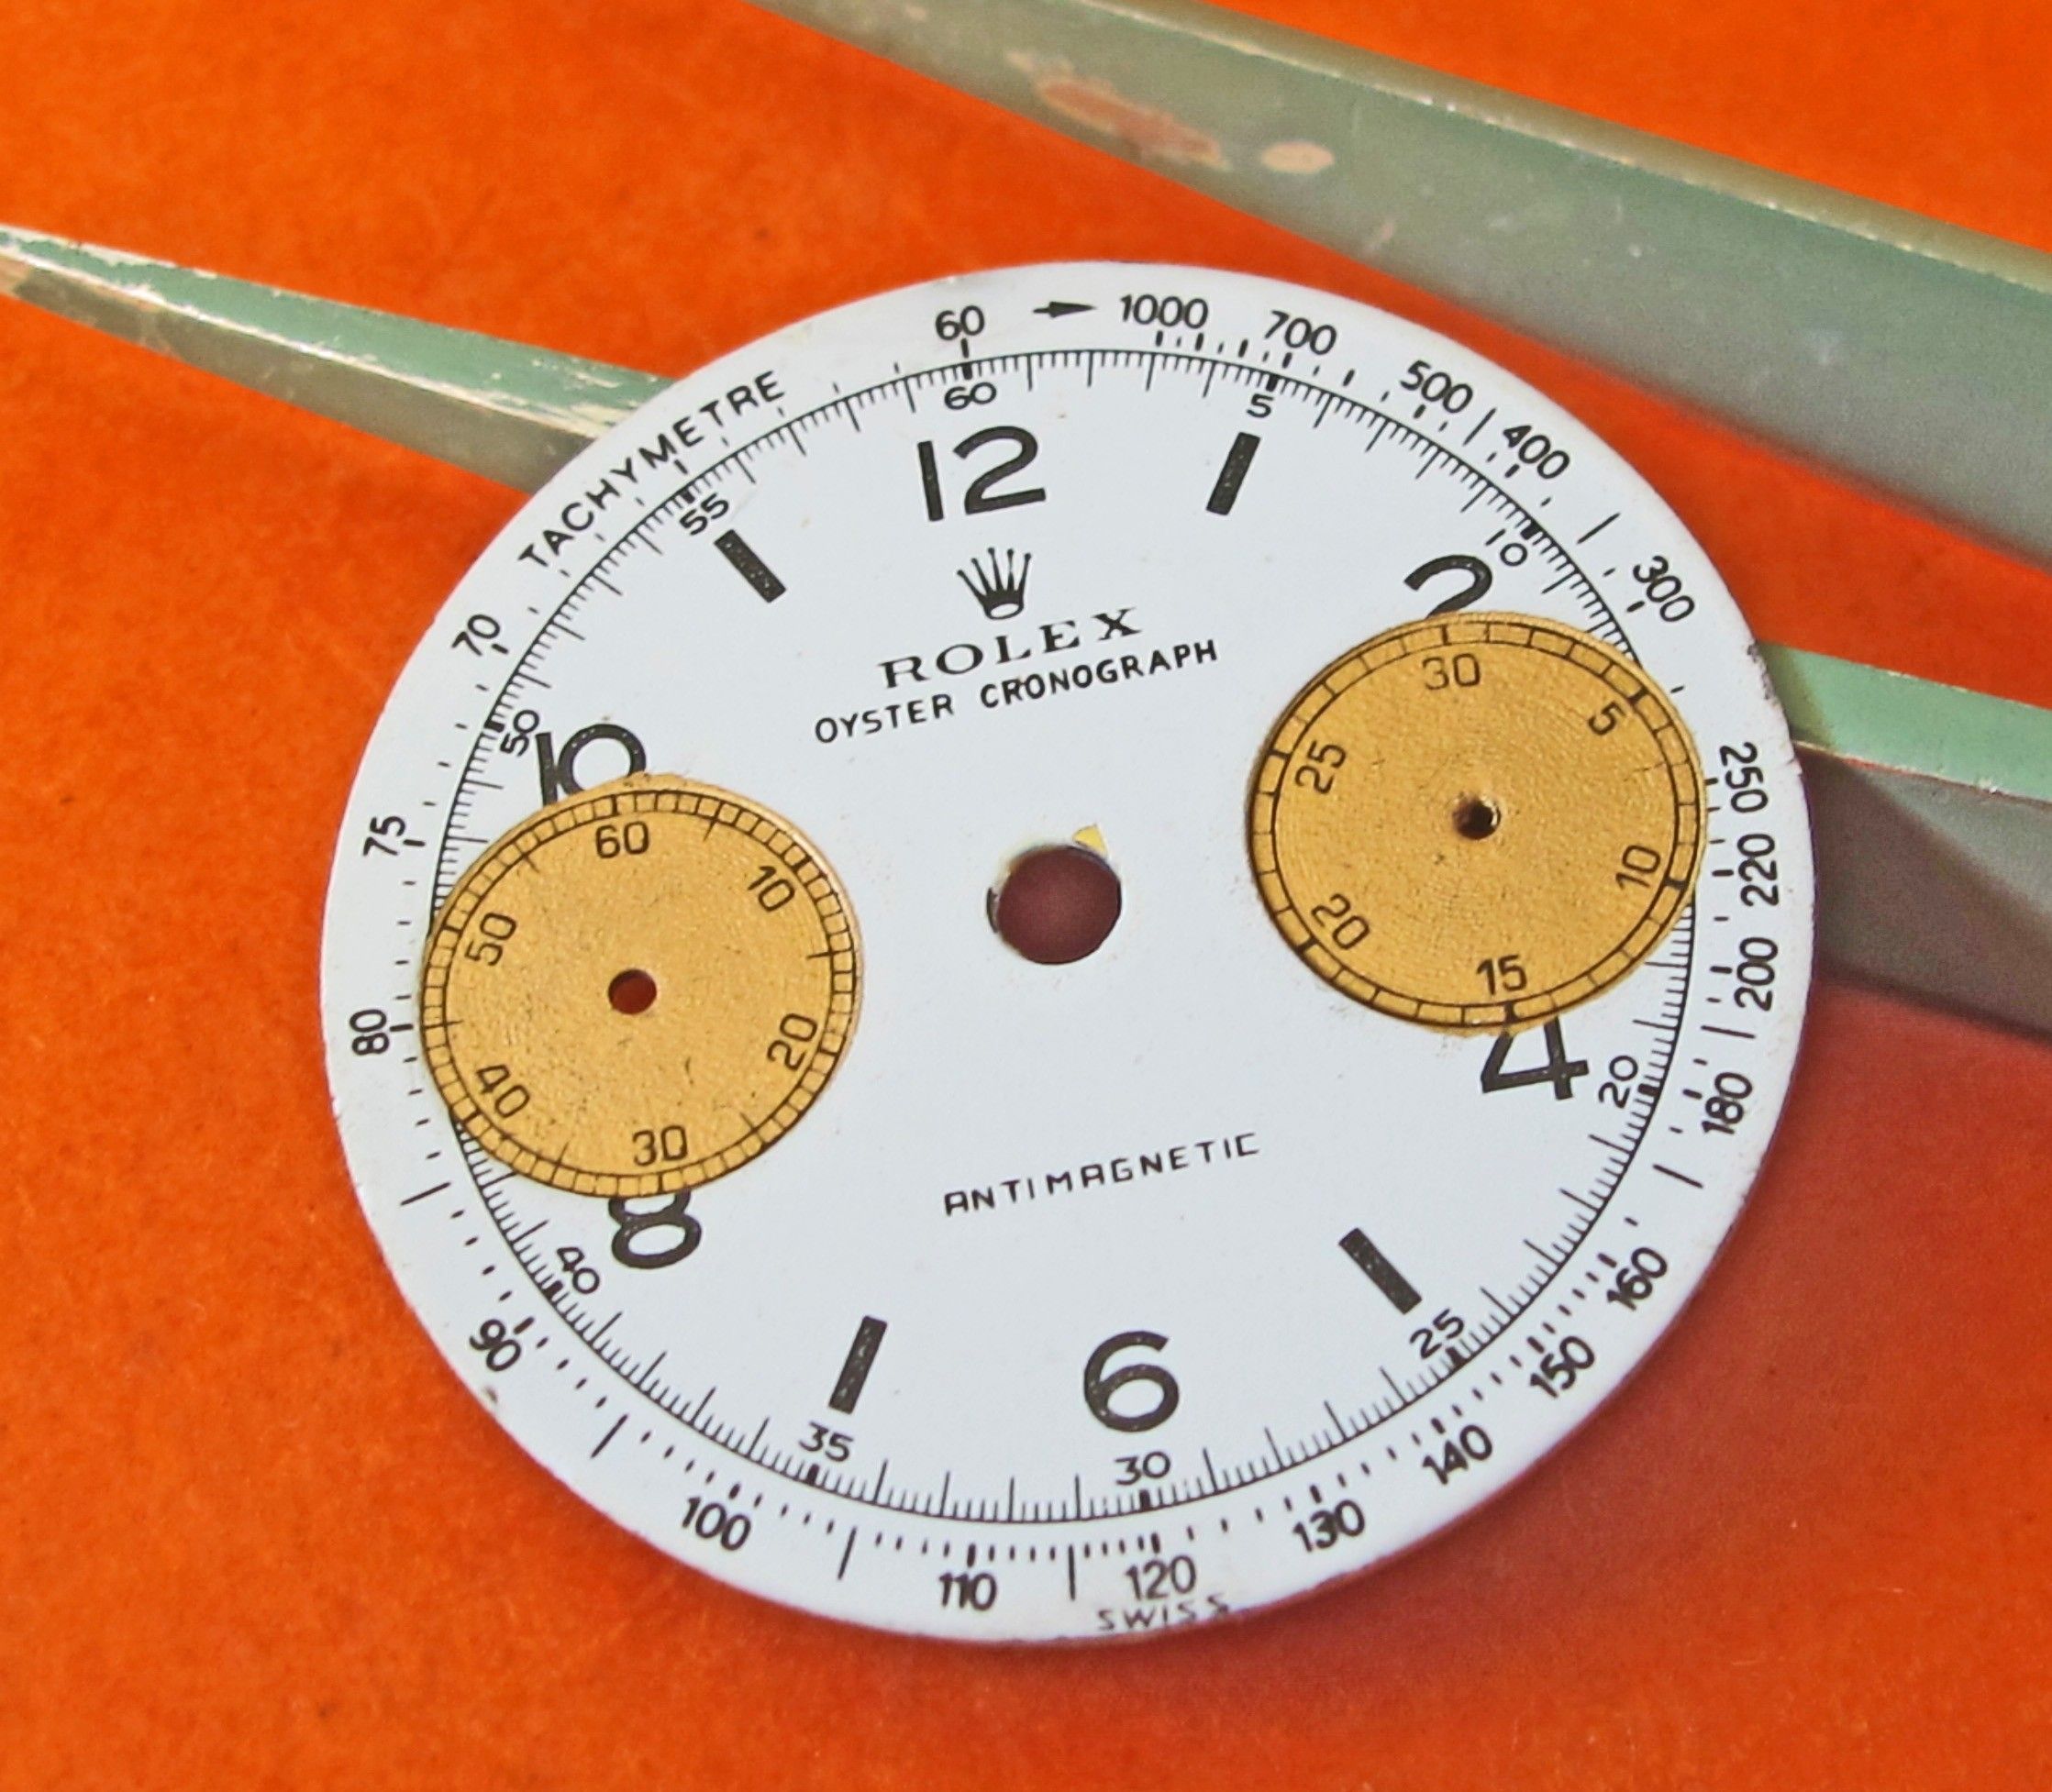 ANTIMAGNETIC CHRONOGRAPH DIAL1940'S